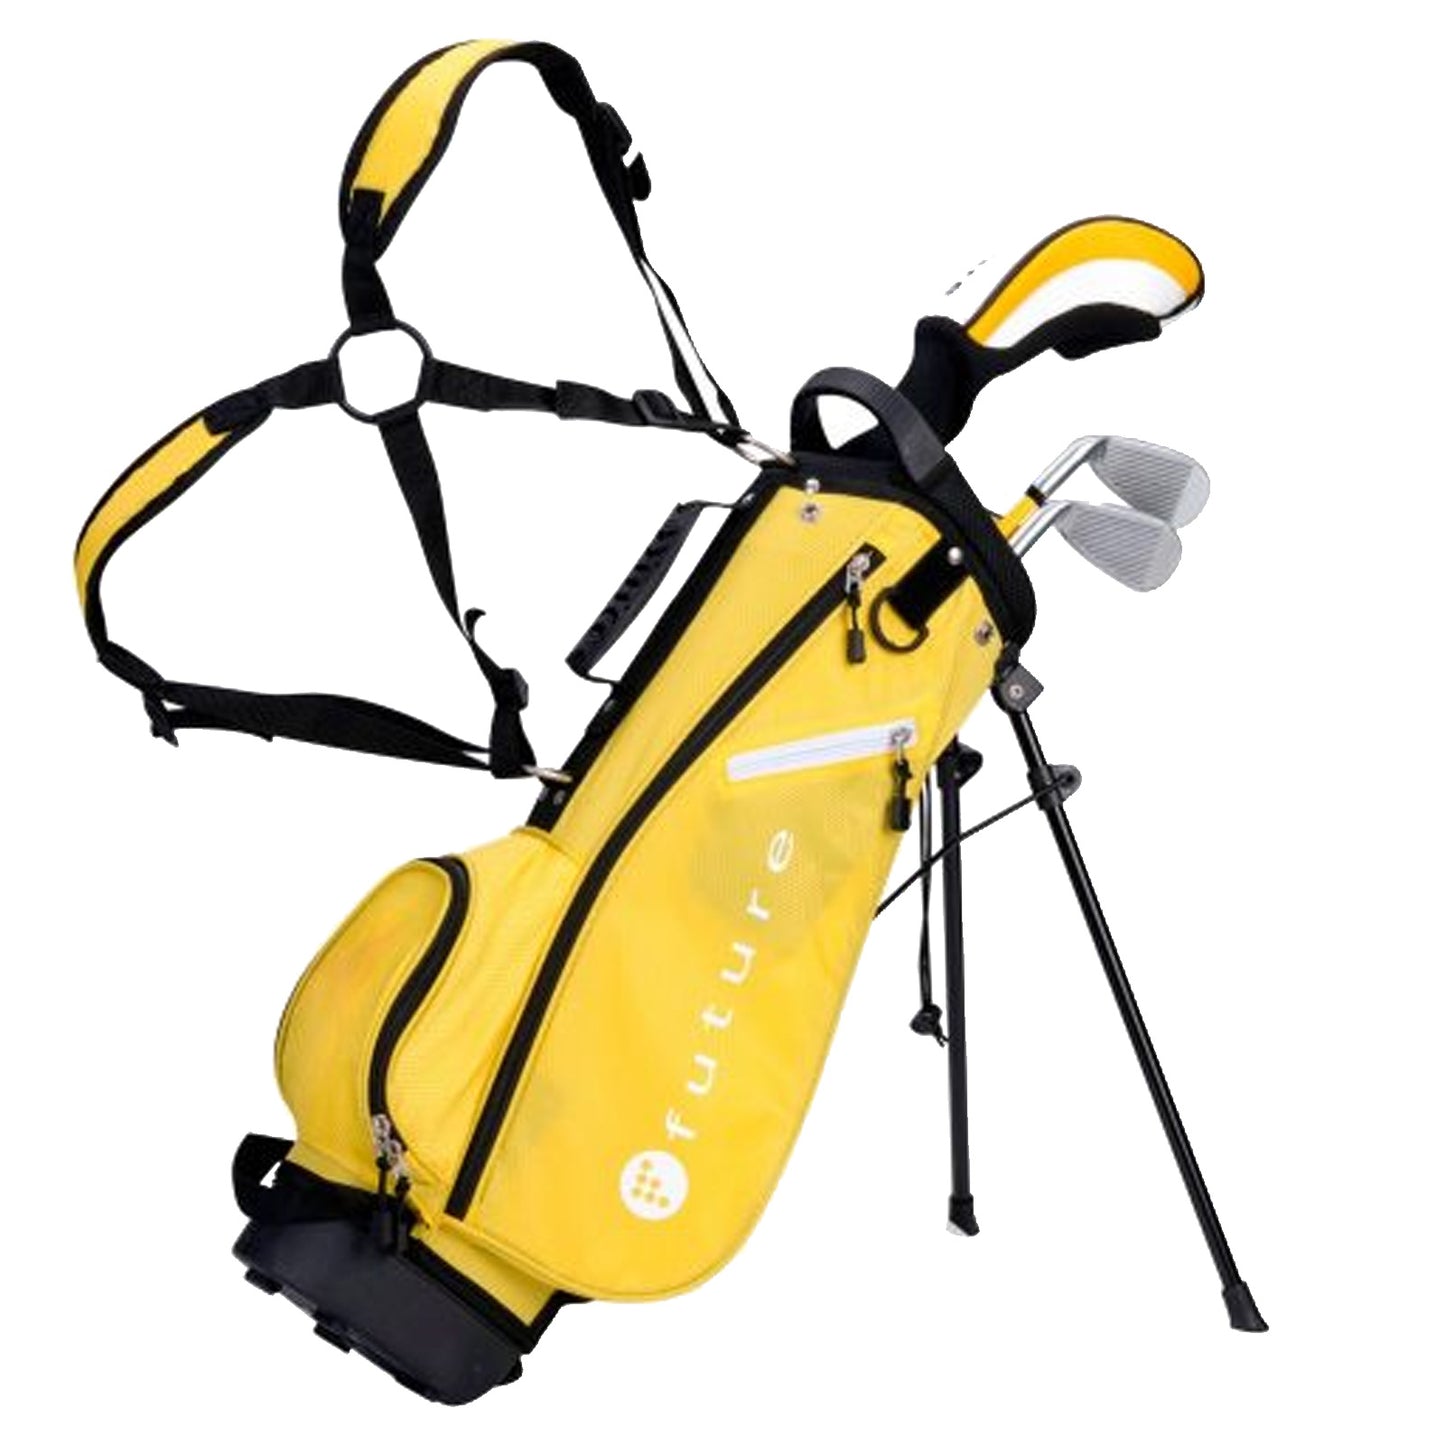 Future Golf Junior Stand Bag Package Sets